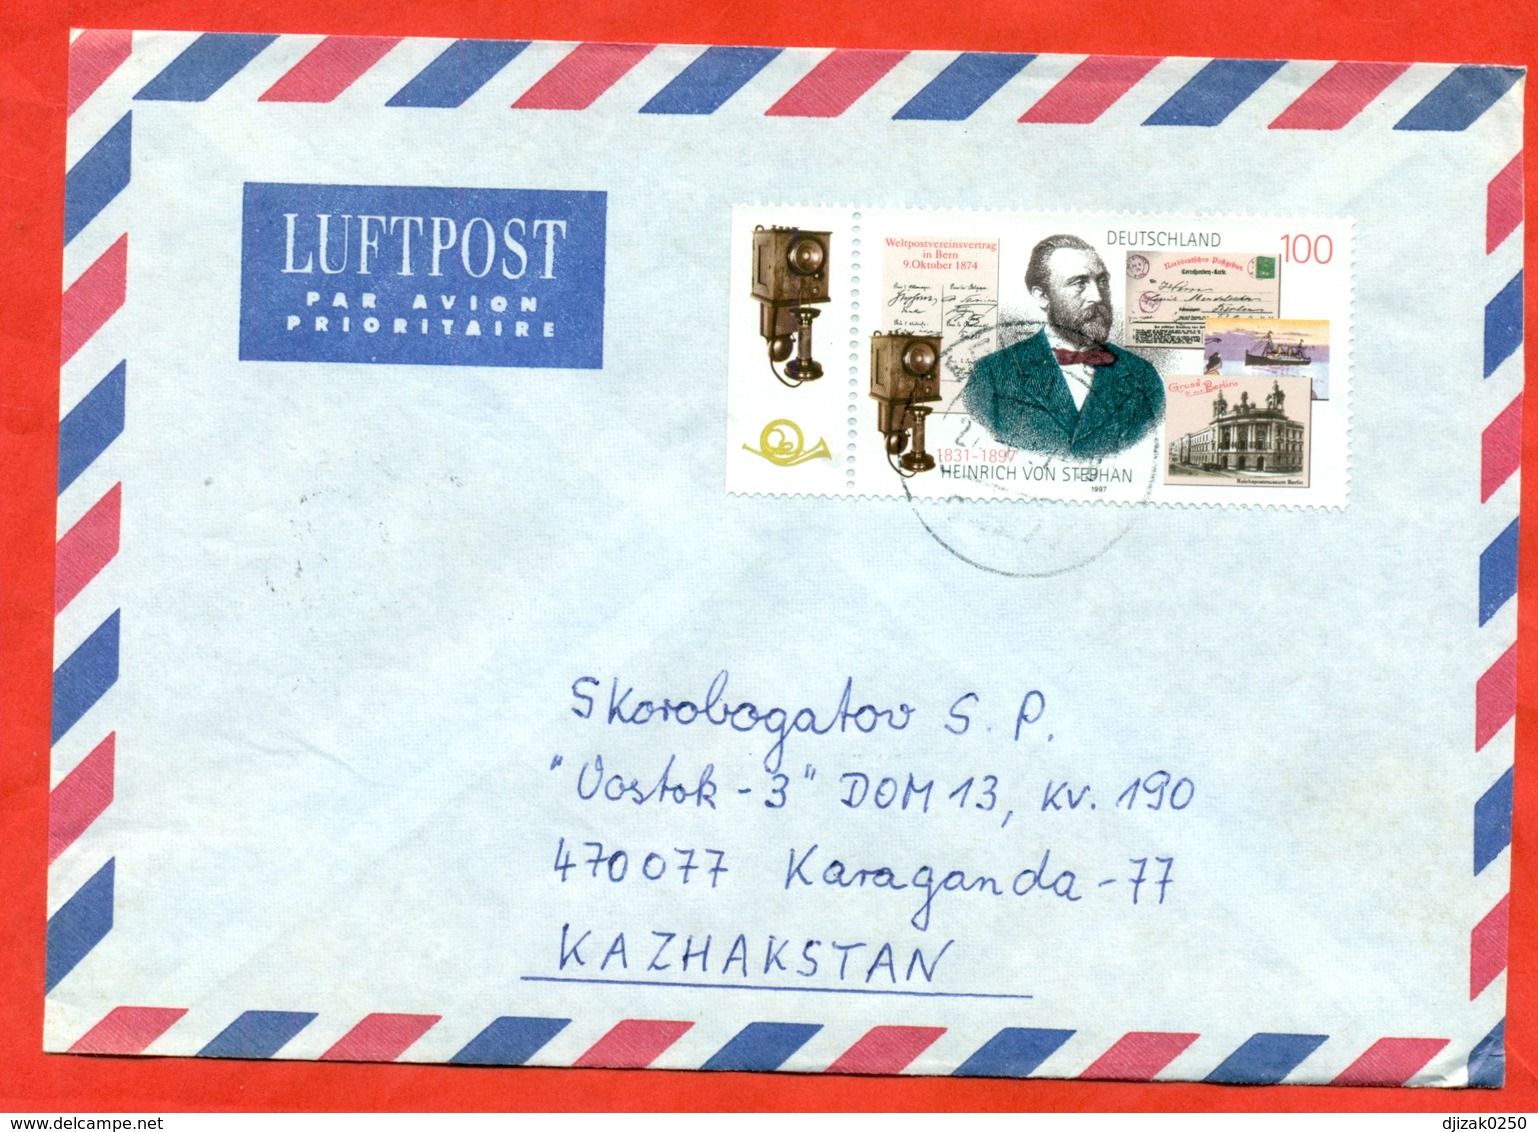 Germany 1997.Telephone/Postmaster. Envelope Passed The Mail.Airmail. - Covers & Documents